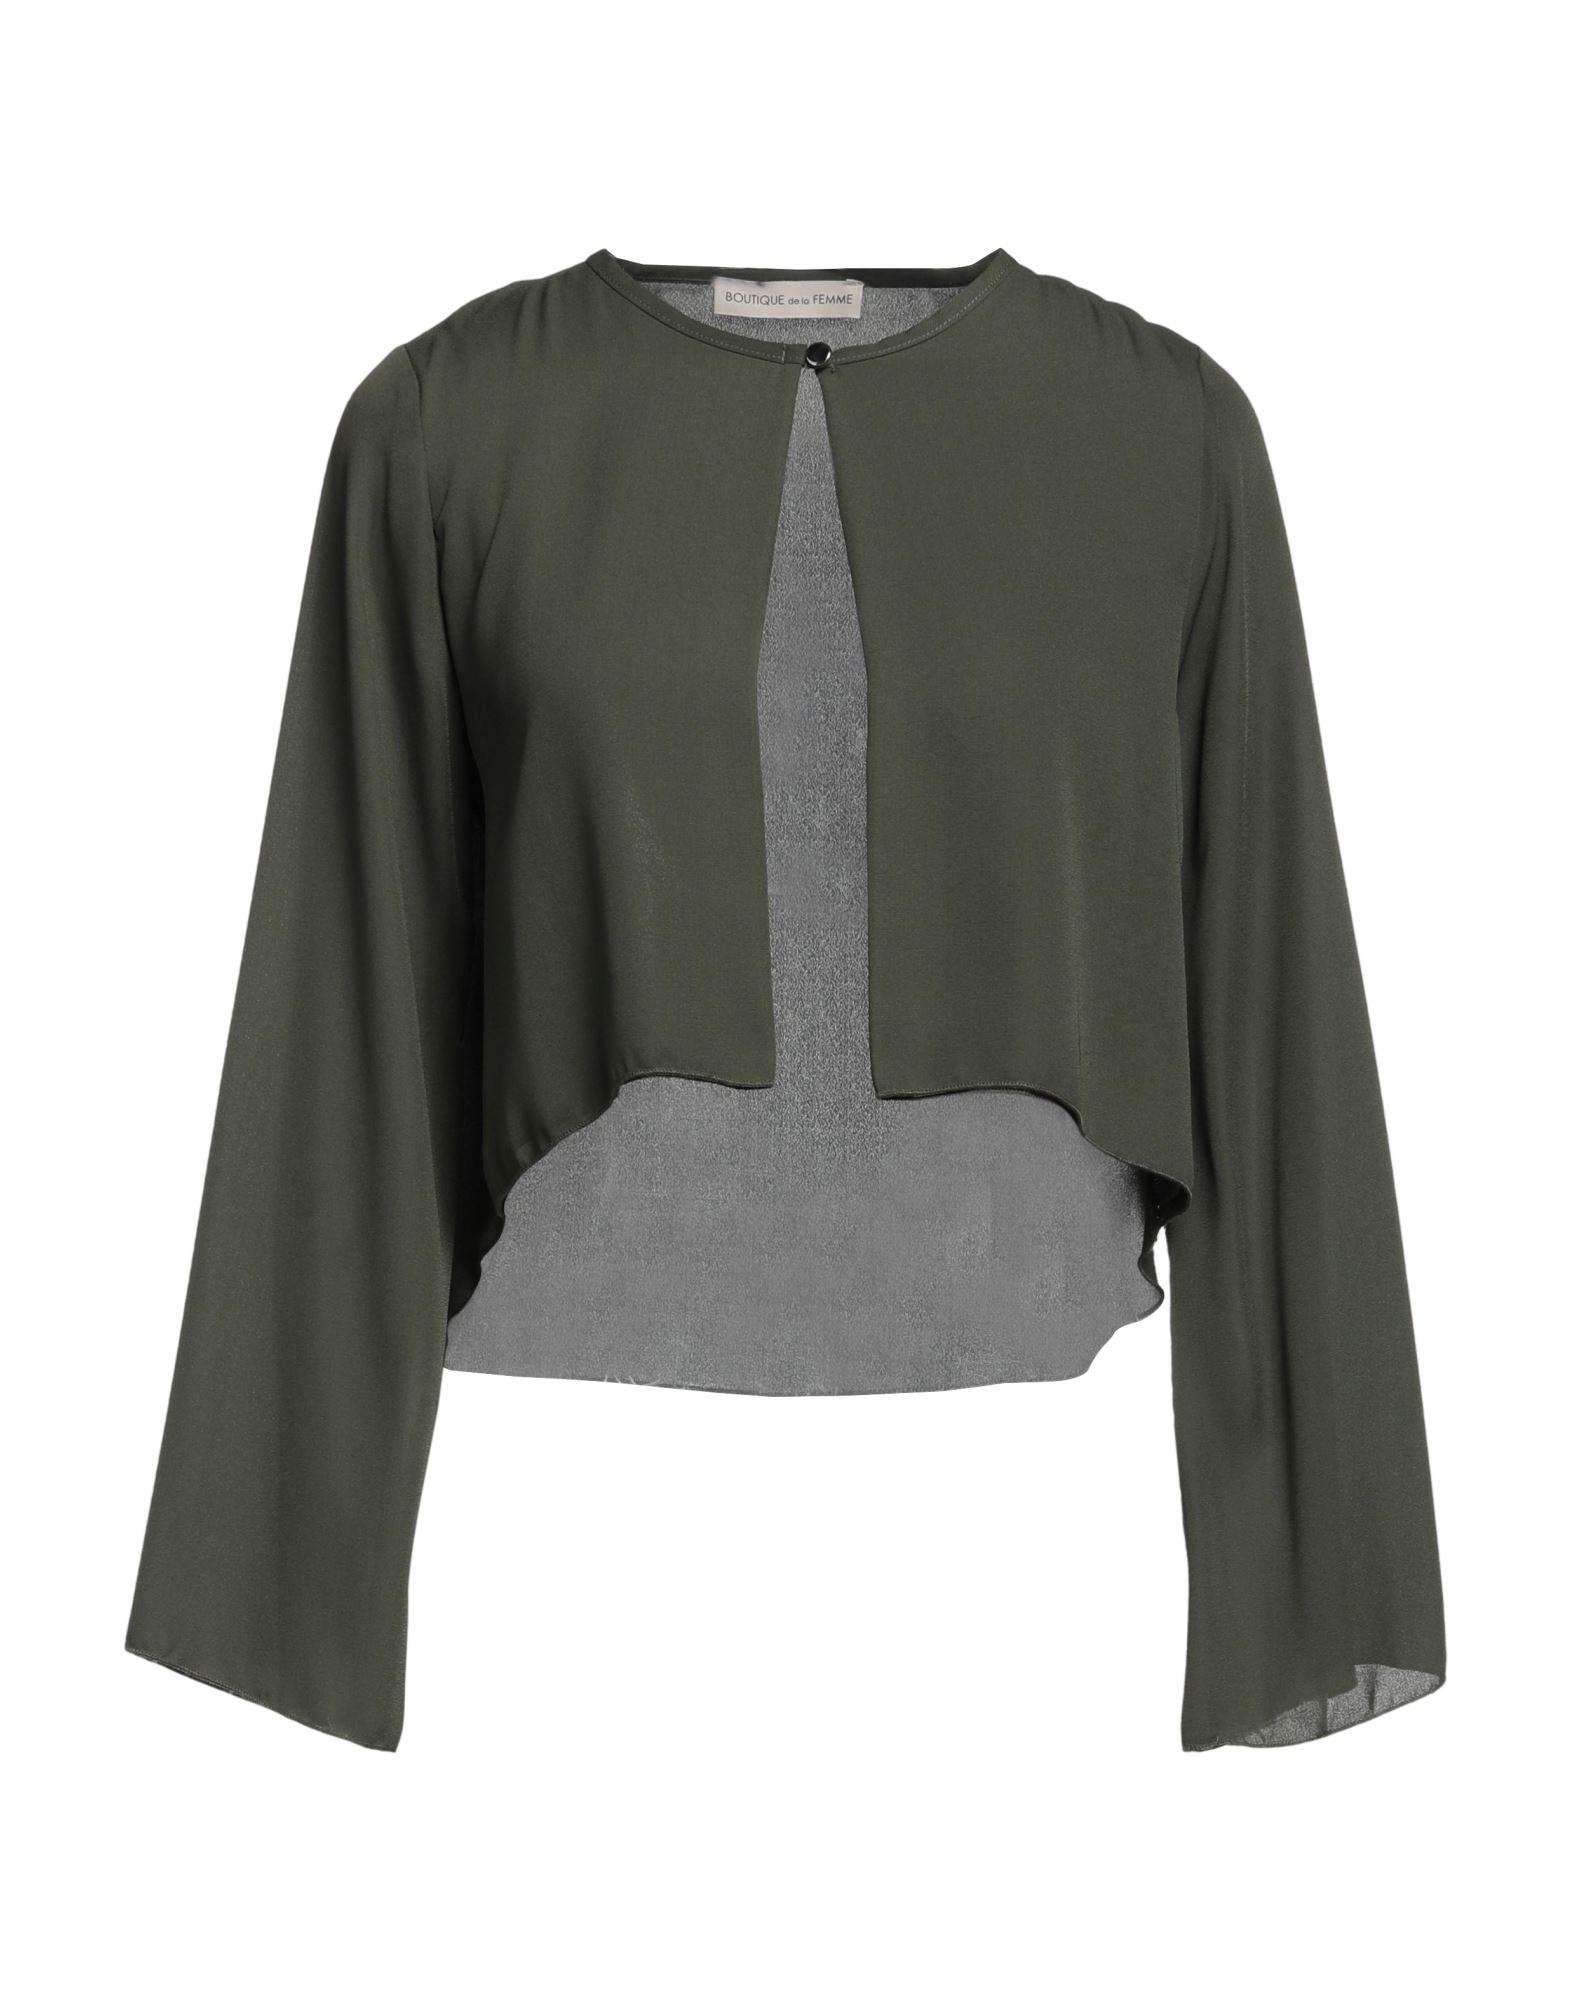 BOUTIQUE DE LA FEMME BOUTIQUE DE LA FEMME WOMAN SHRUG MILITARY GREEN SIZE S POLYESTER